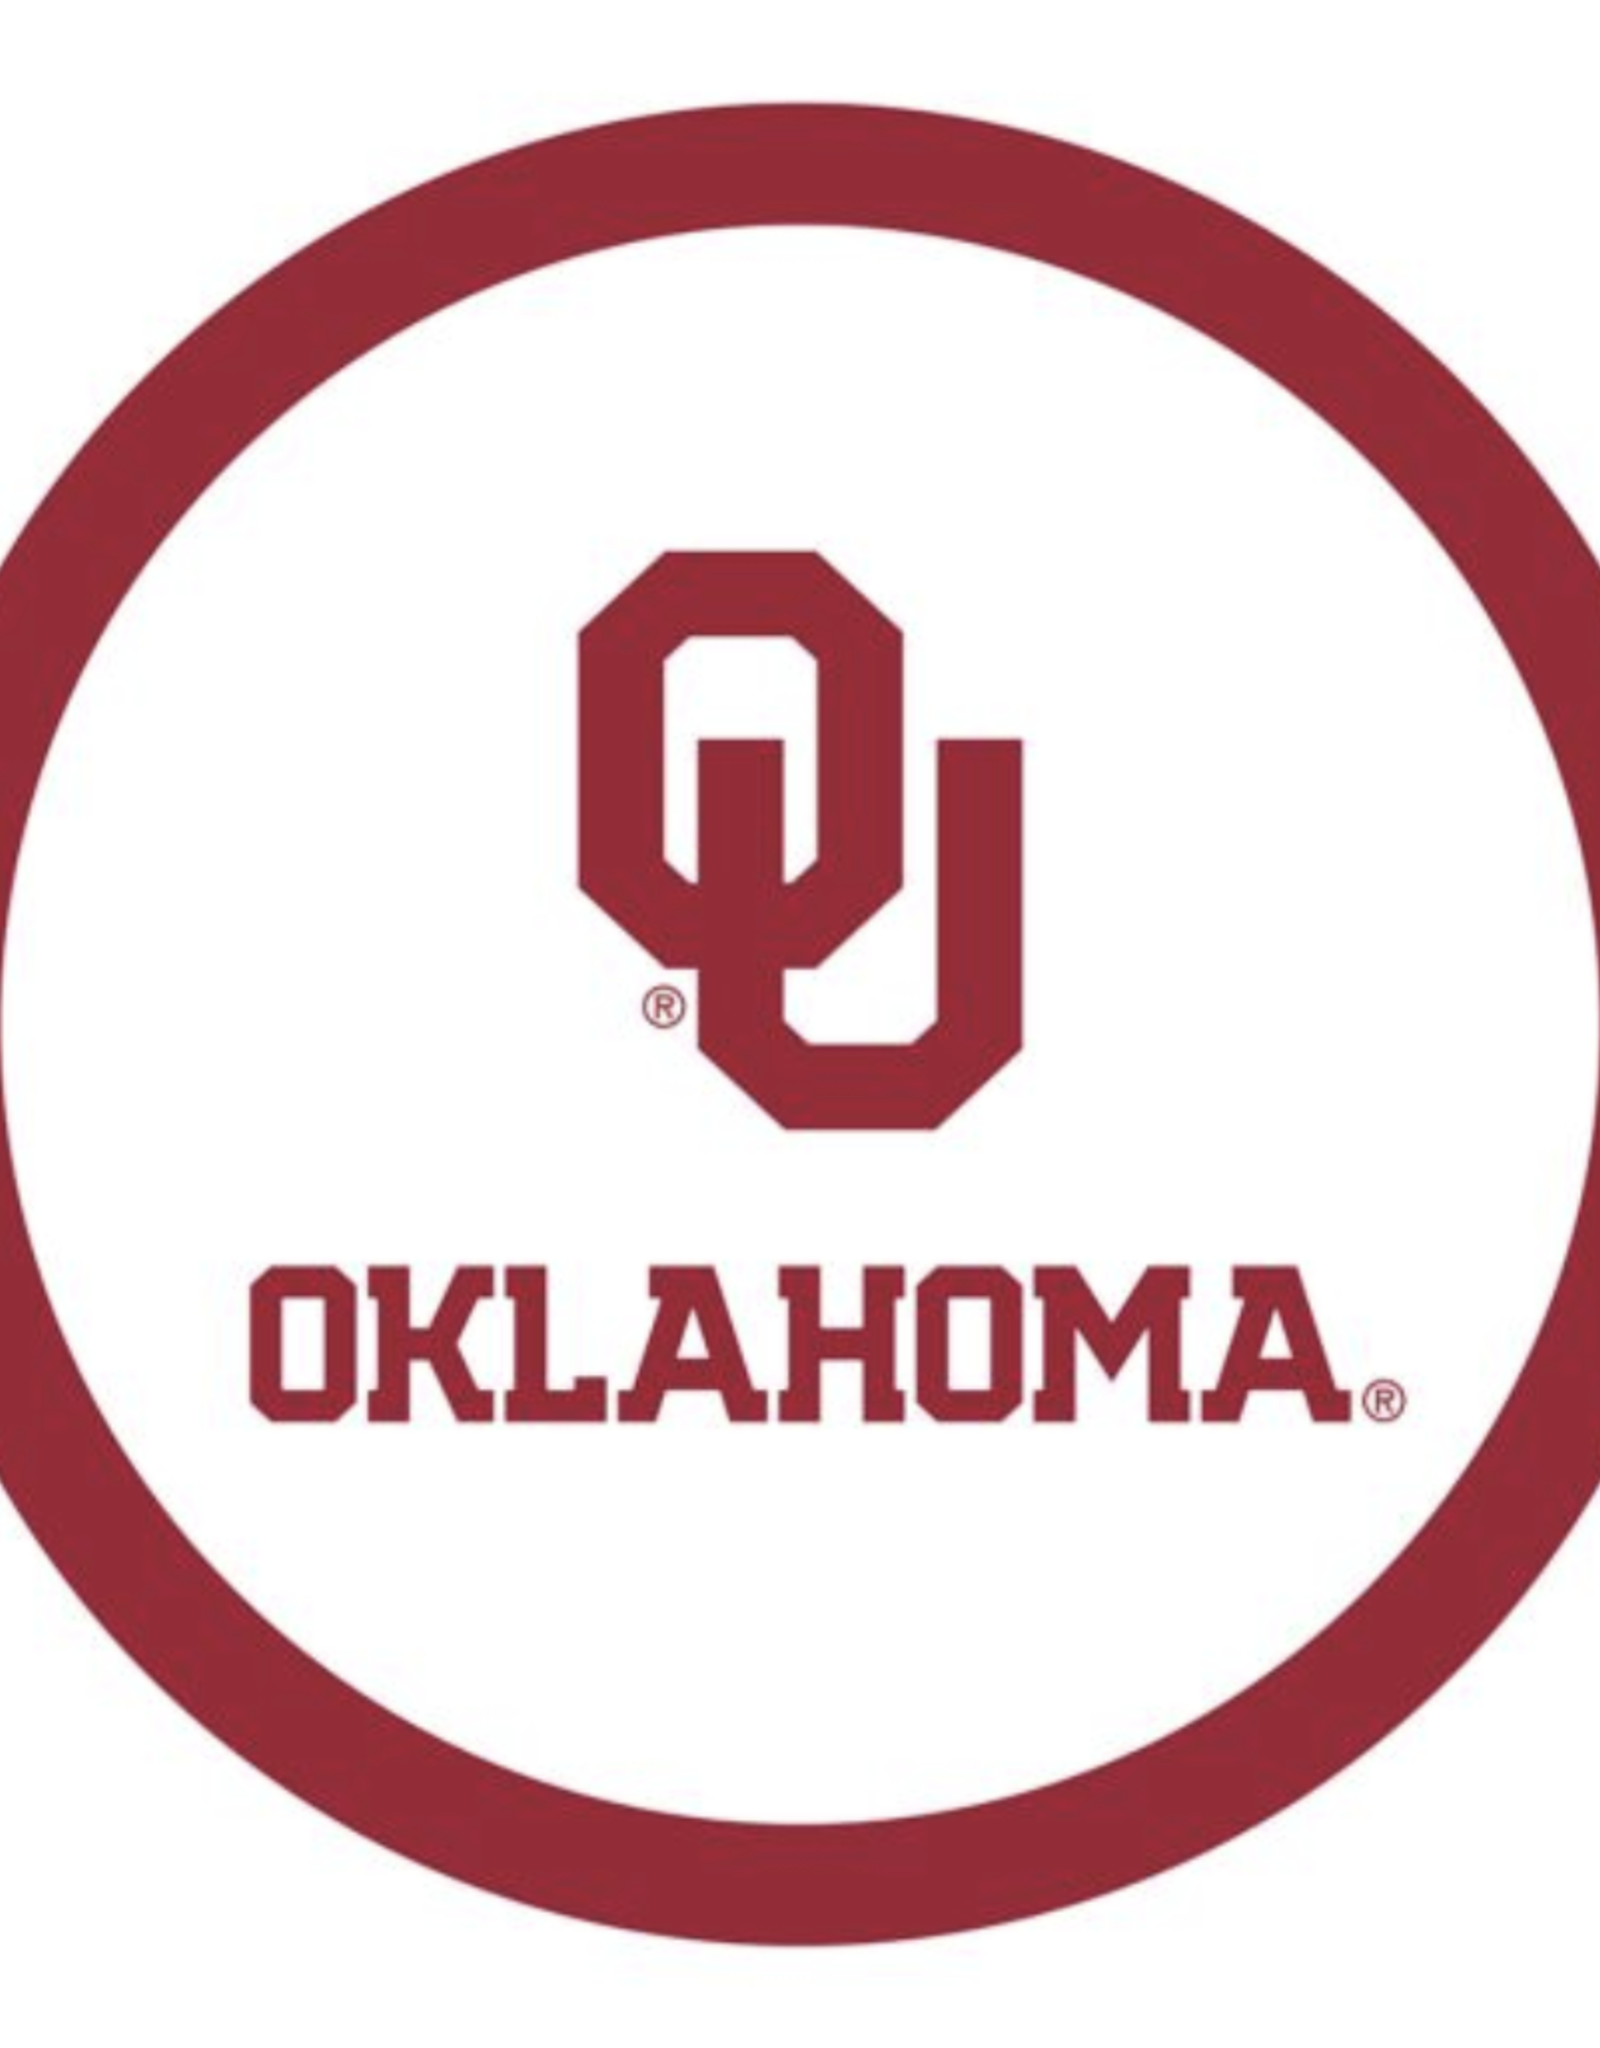 Mayflower OU Oklahoma White 9" Paper Plate (10 Count)